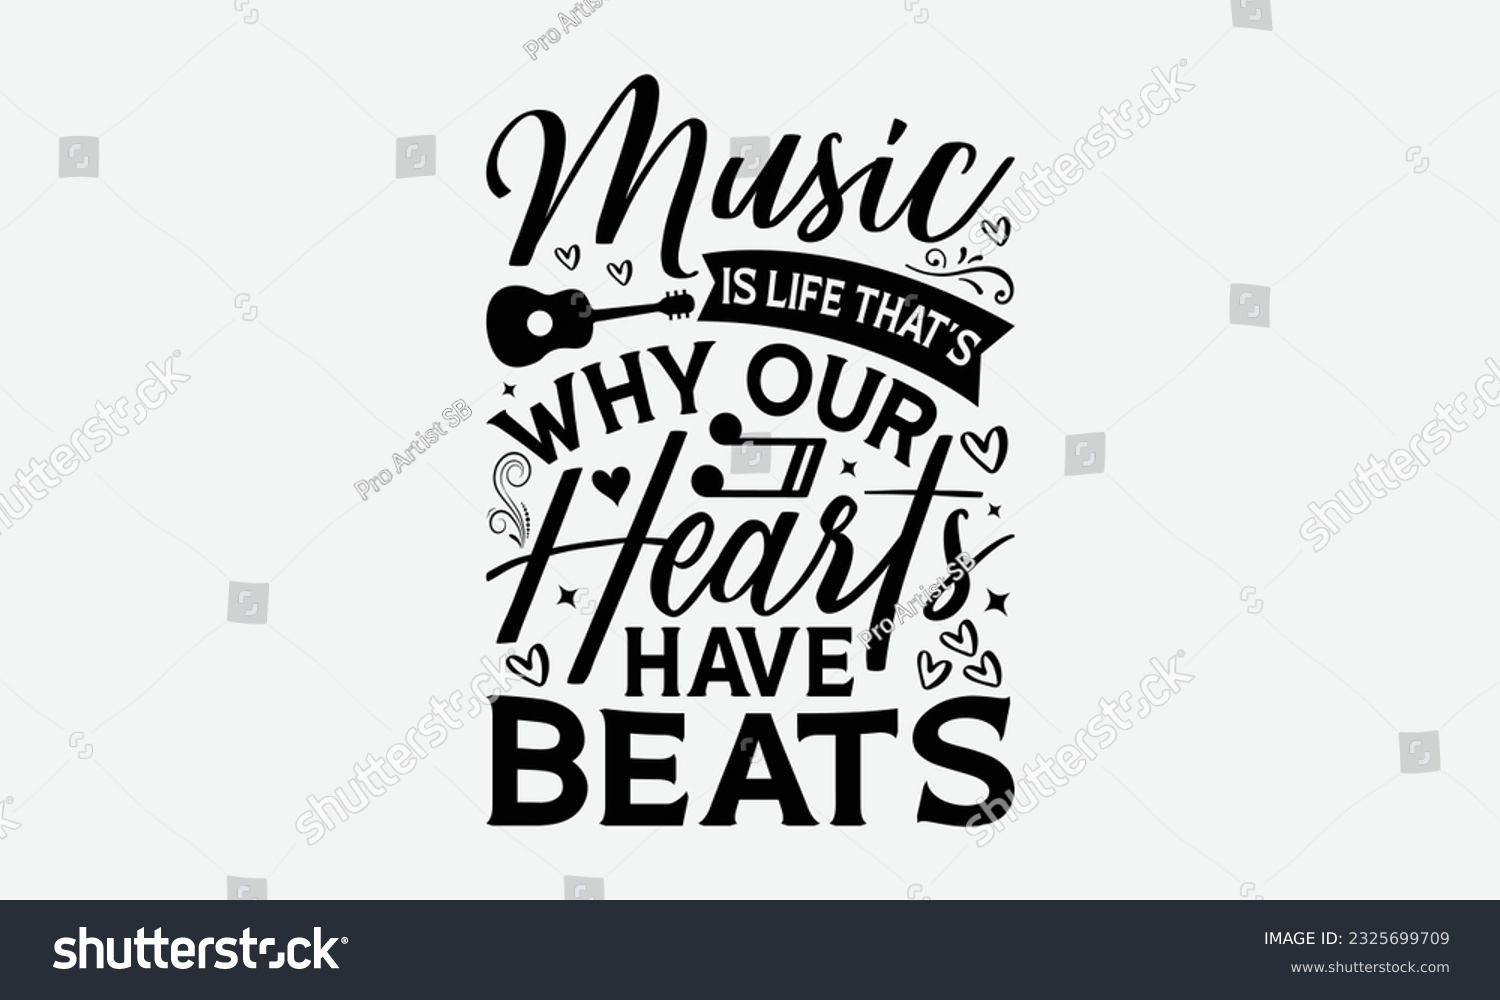 SVG of Music Is Life That’s Why Our Hearts Have Beats - Guitar SVG Design, Cool Music T Shirt, This Can Be Printed On T-Shirts, Hoodies, Mugs, Tote Bags, Pillows and More. svg